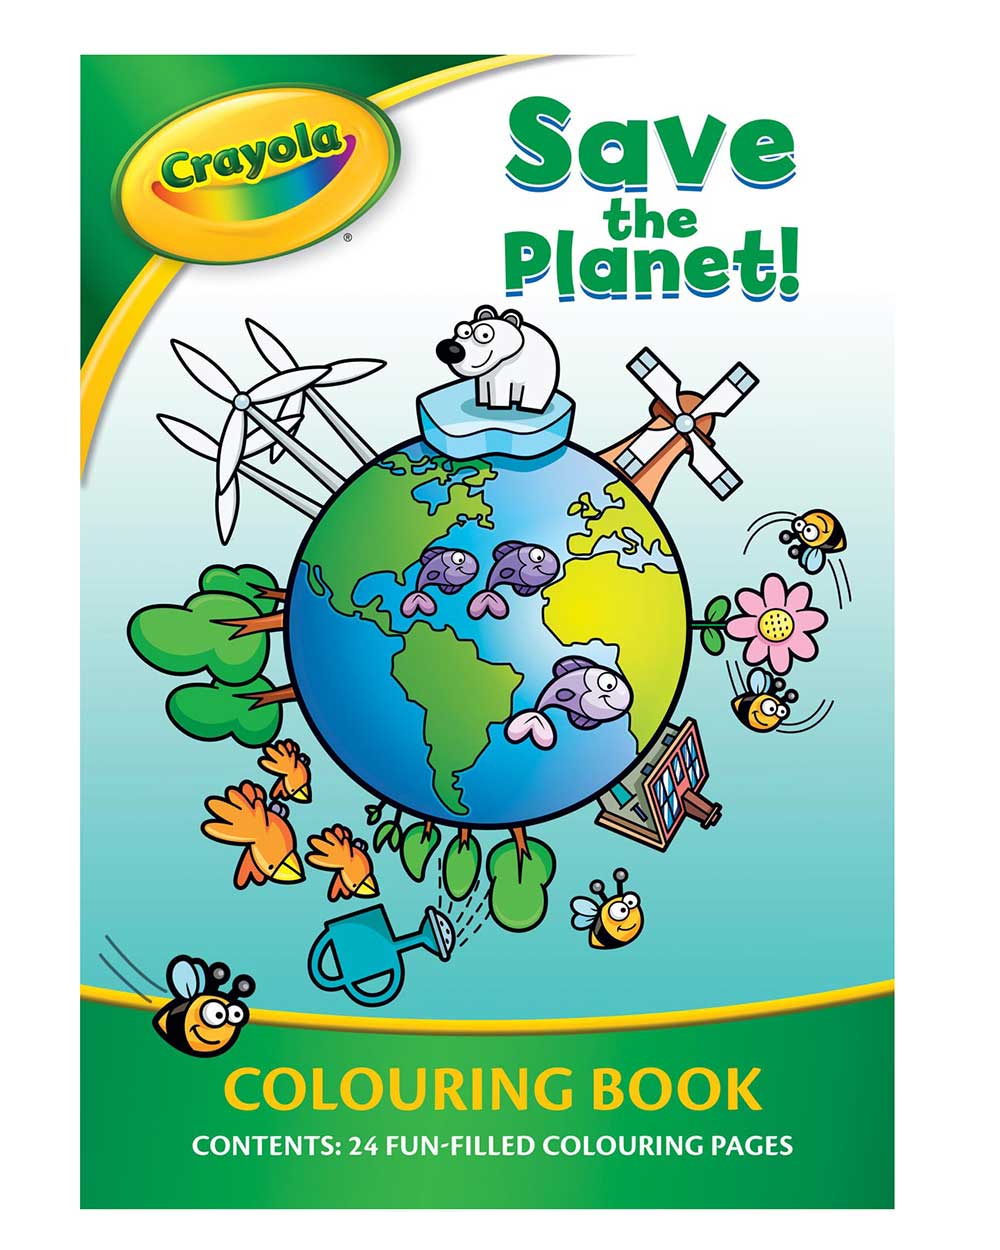 Crayola save the planet colouring book for kids front cover featured on a white background